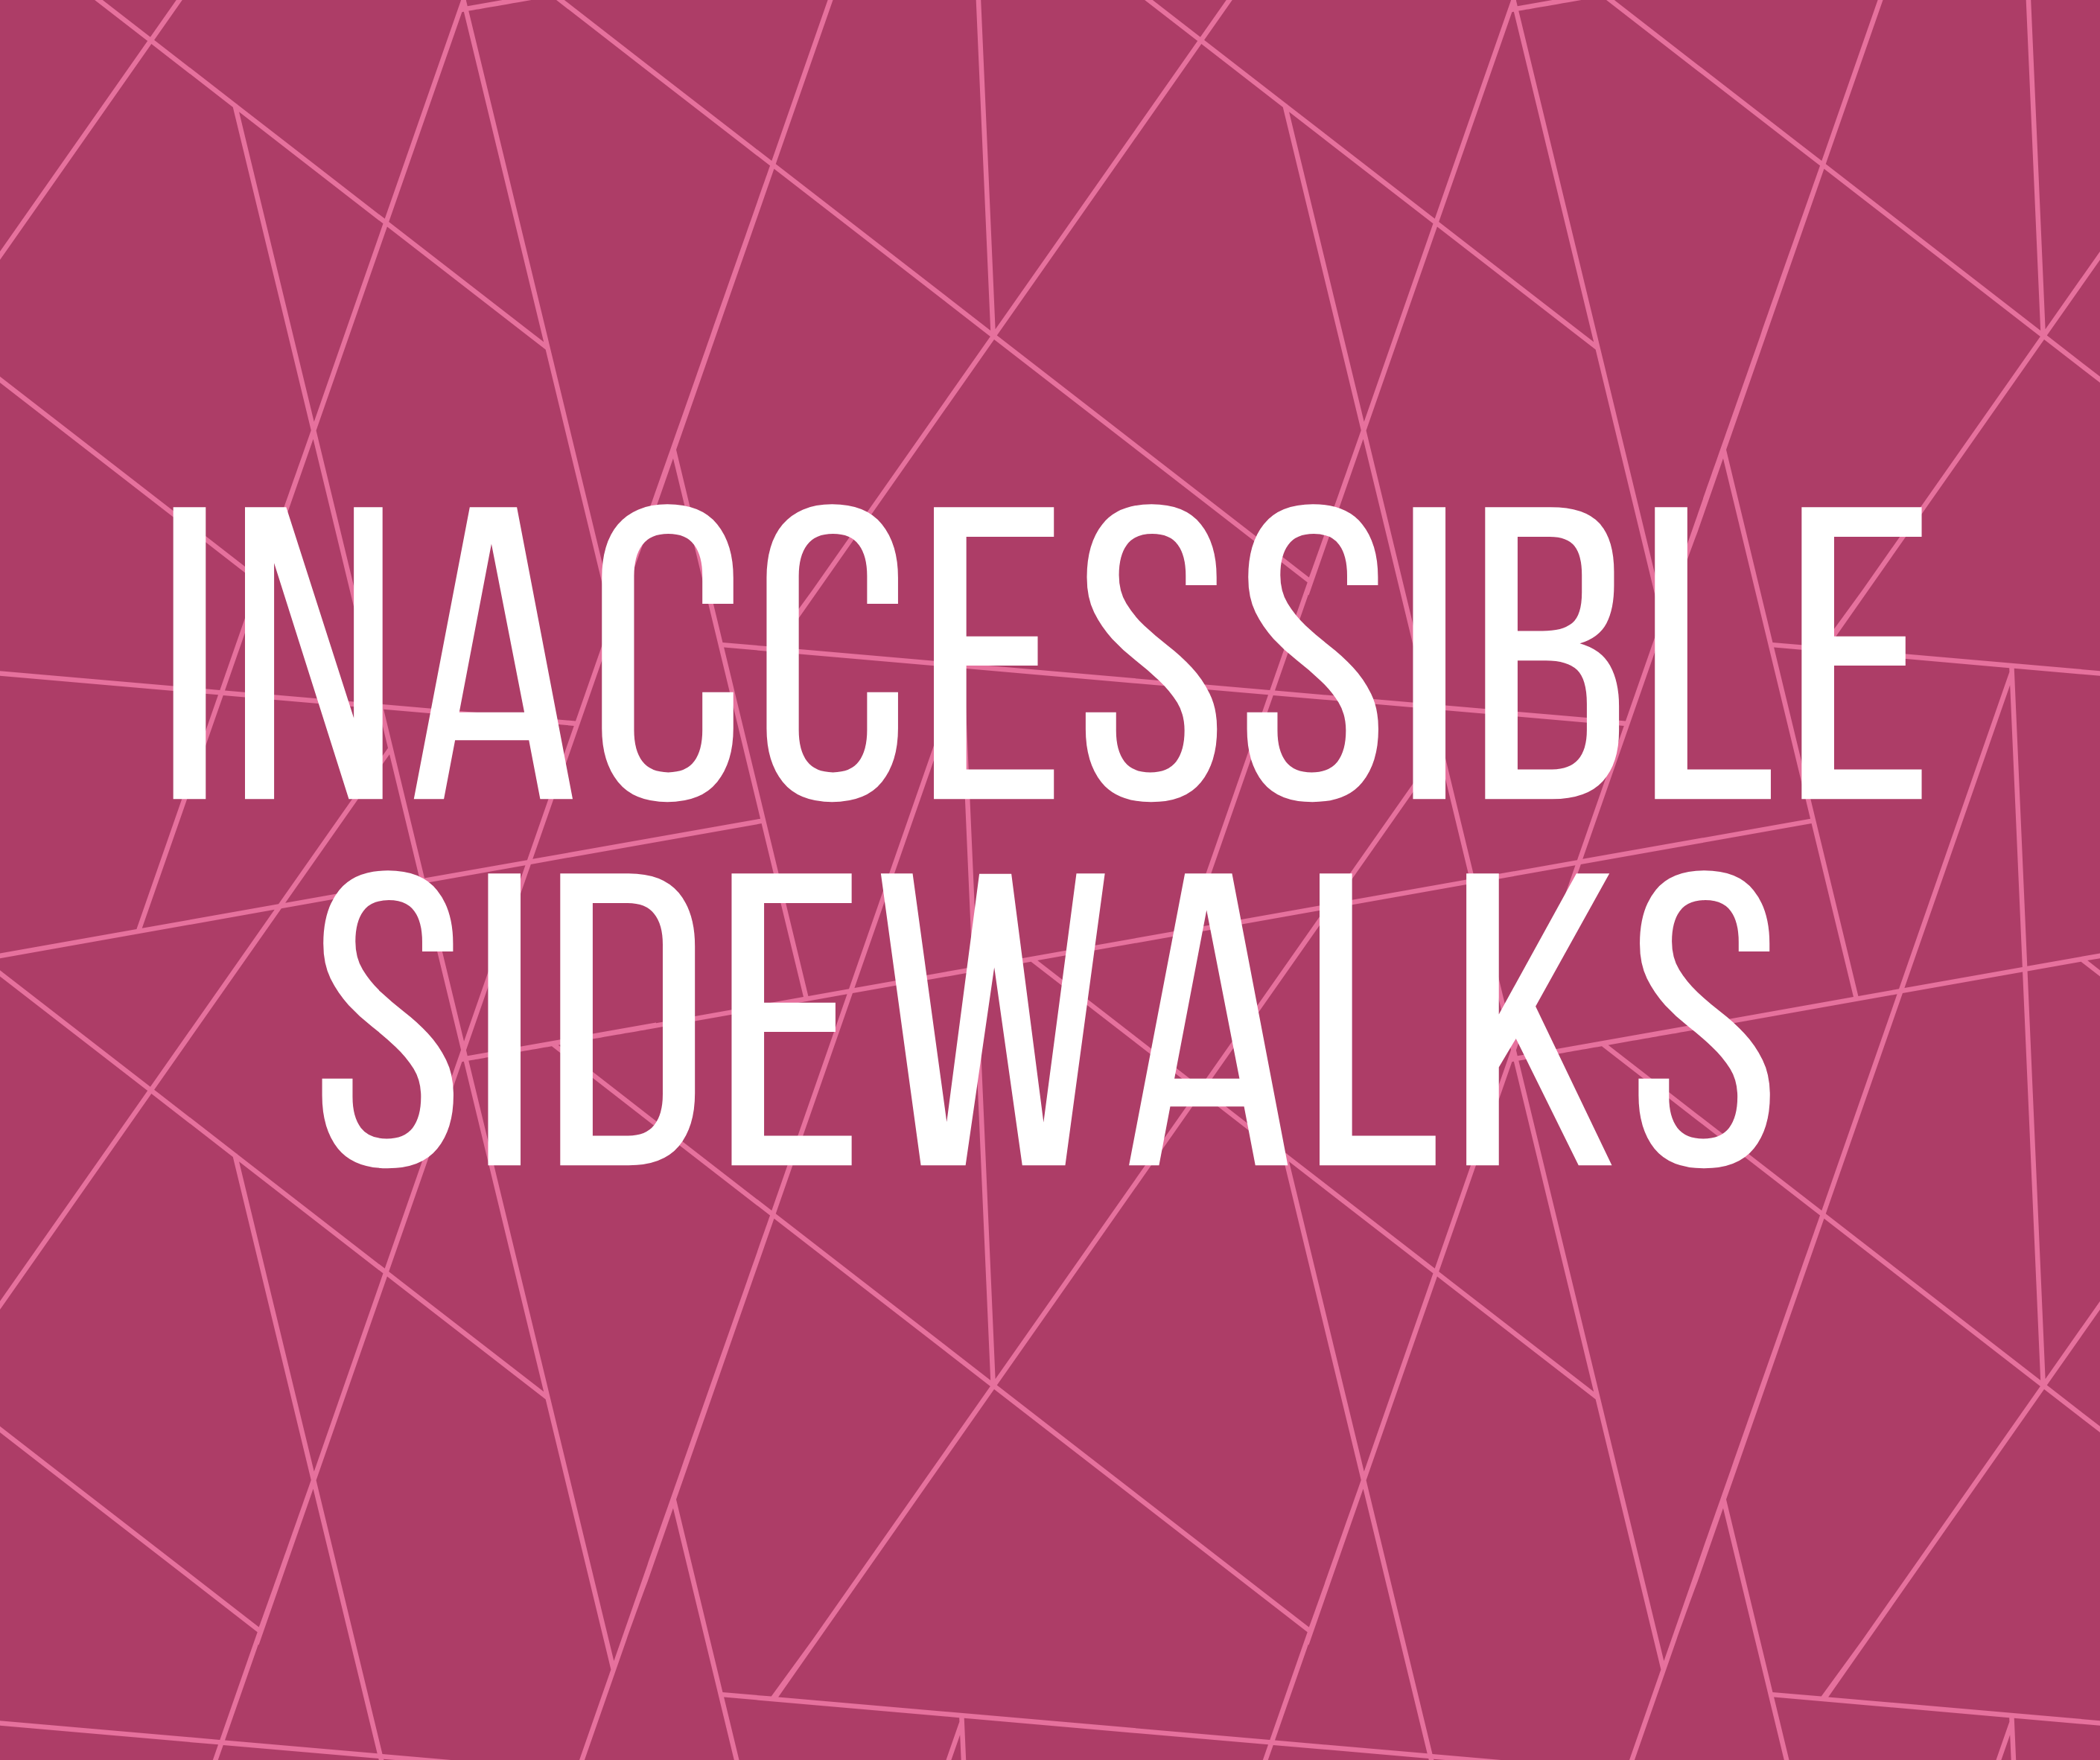 How to Improve Sidewalks to Help Those with Disabilities